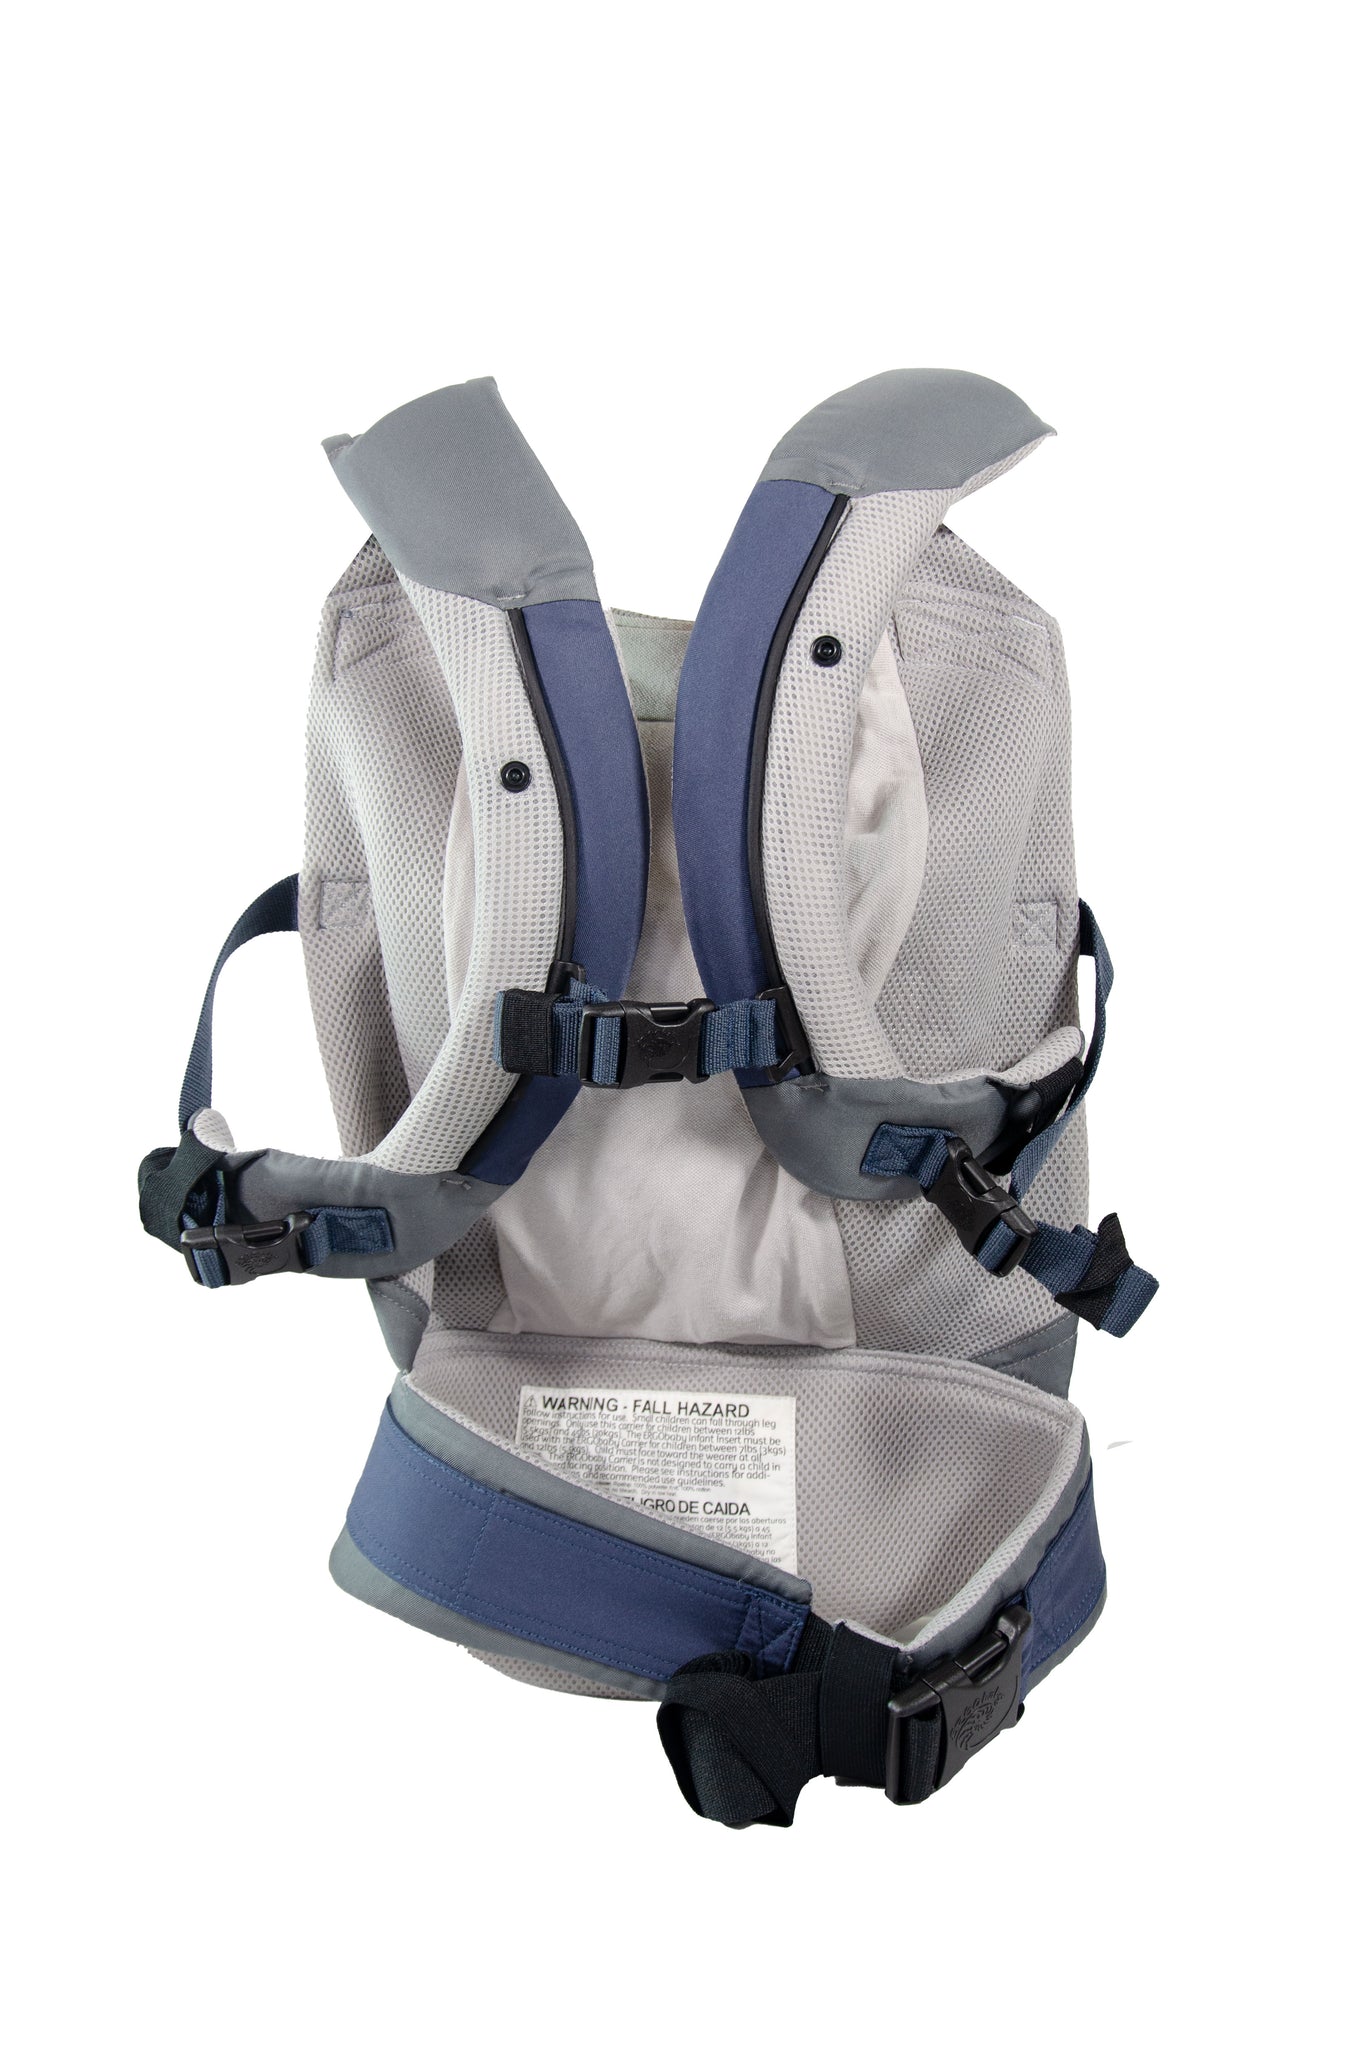 used ergobaby carrier